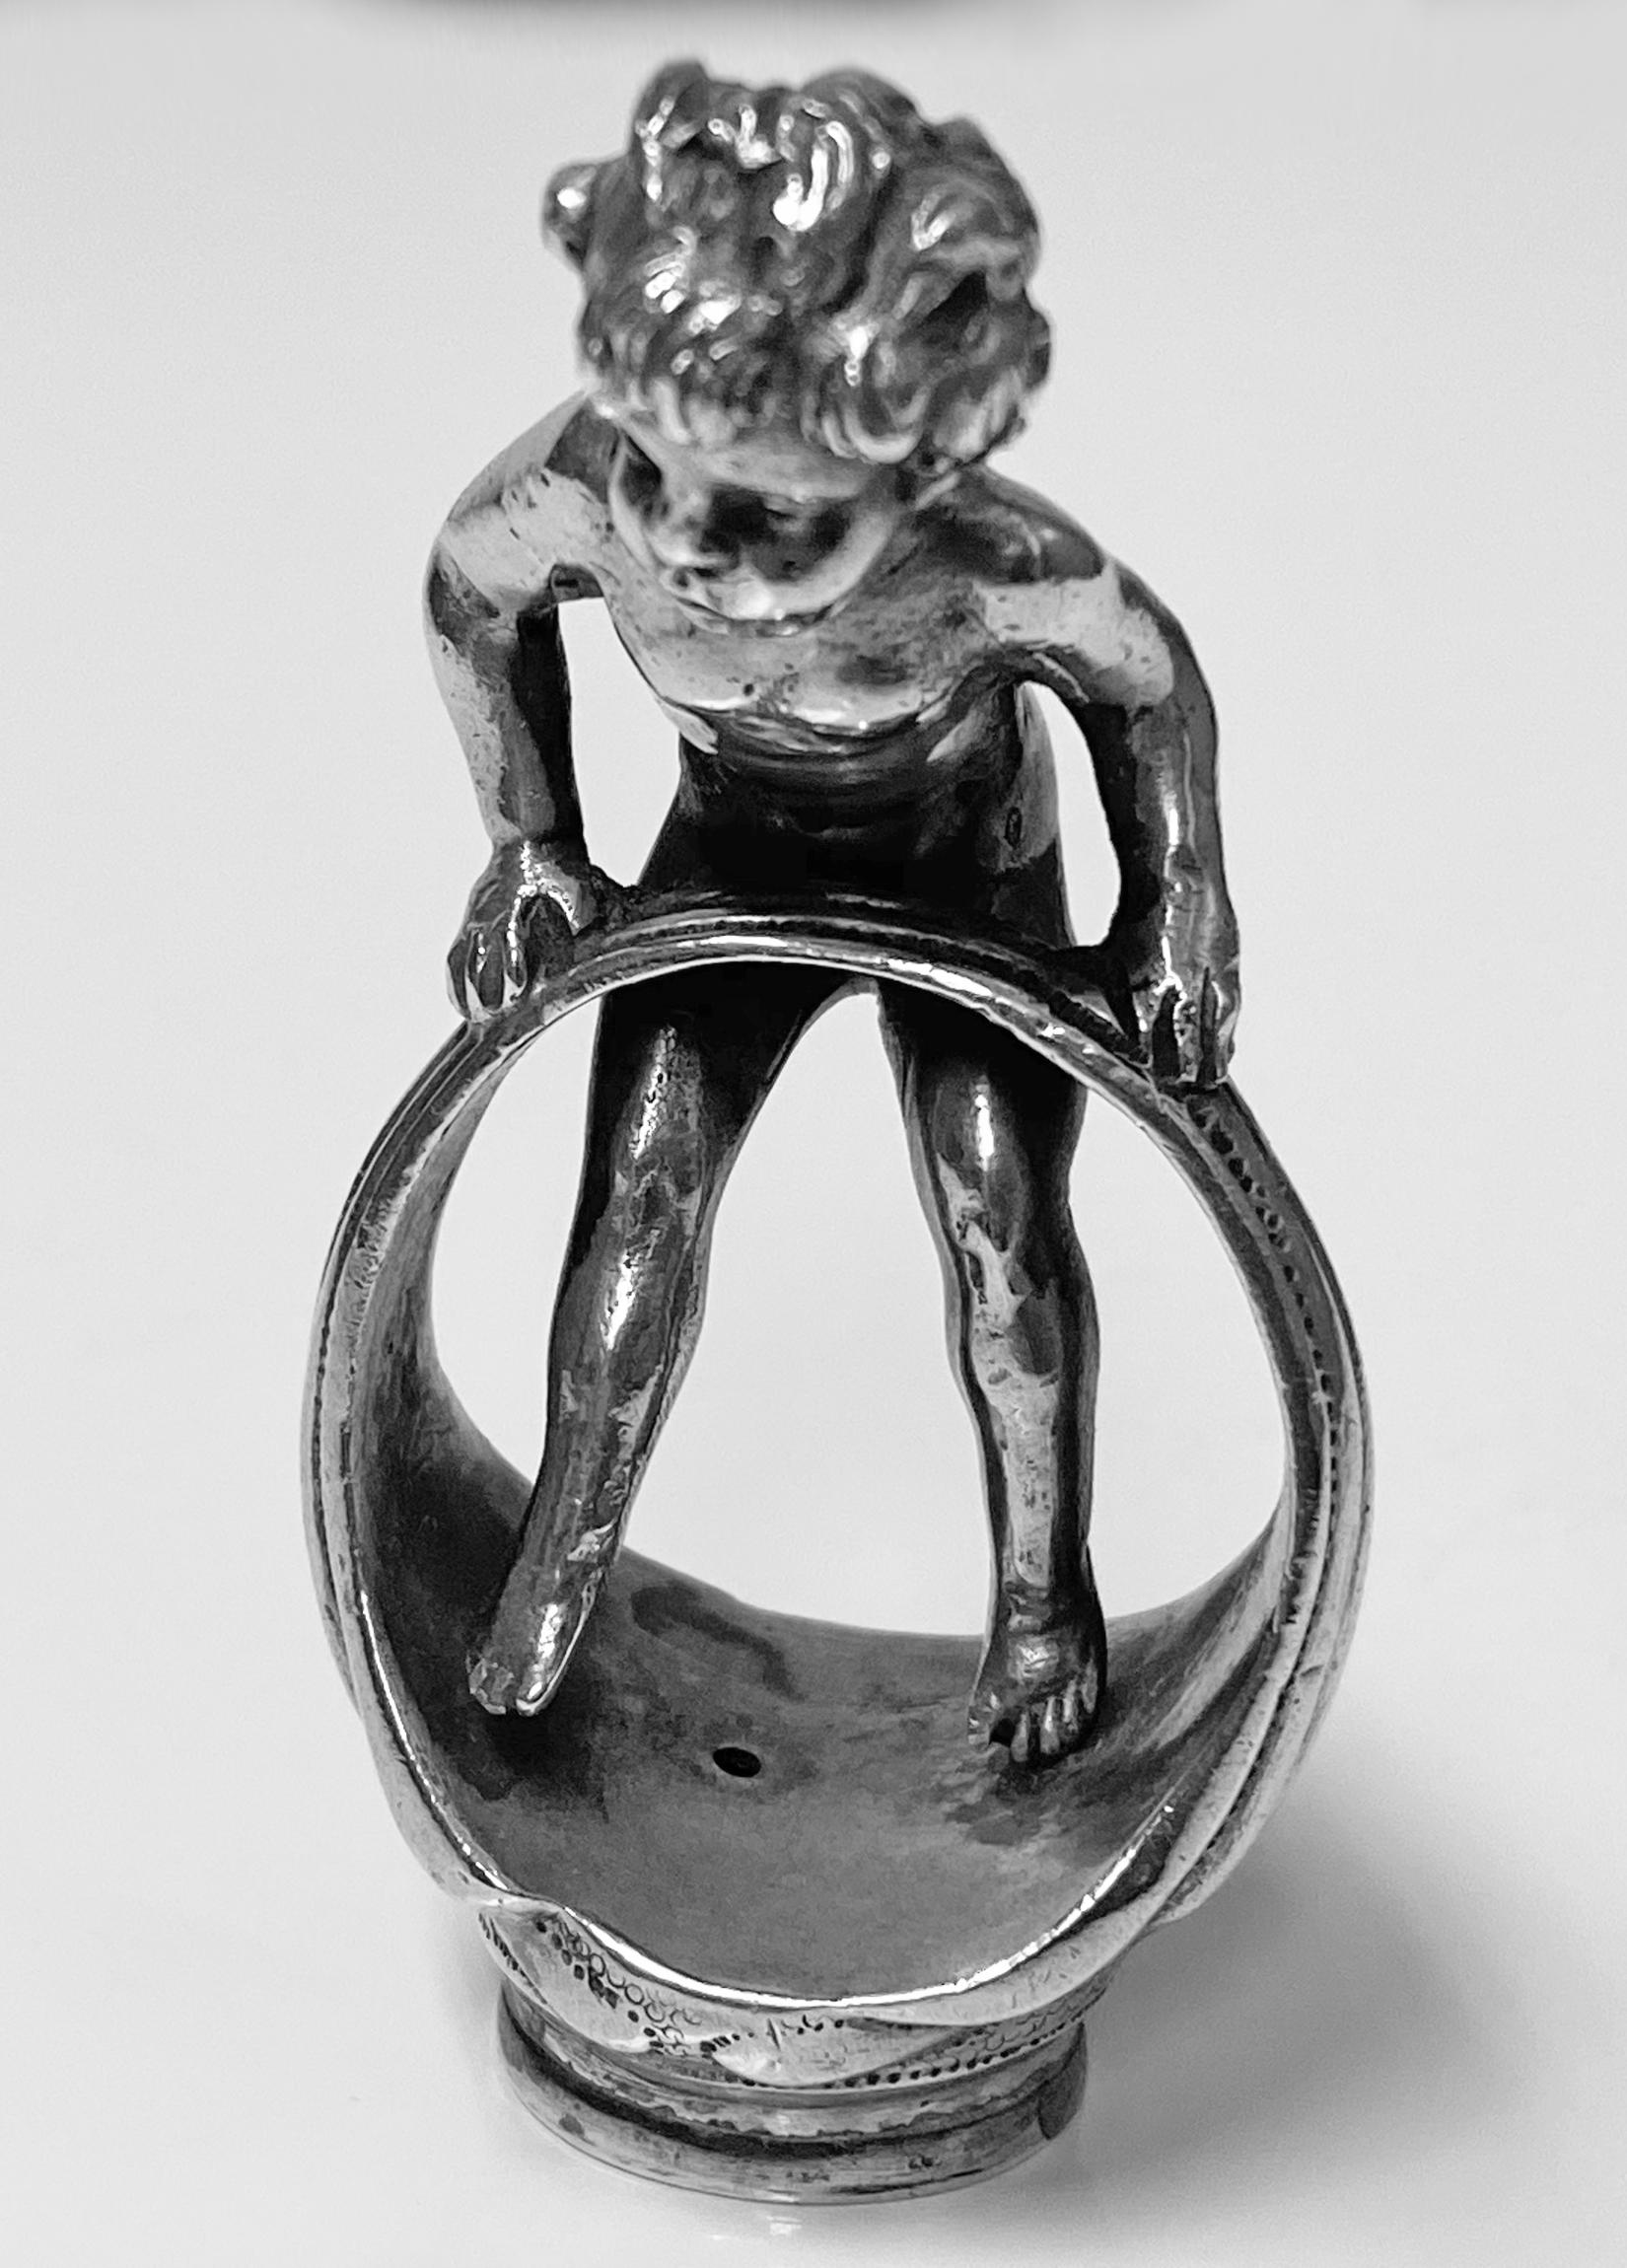 Large Sterling Silver Desk Seal with Cherub or angelic figure in a Finger Ring engraved with crest of a cat at the base. Unusual nude figure balancing on the ring. The back of leg with import marks for Chester 1912. Condition: Very good. Height: